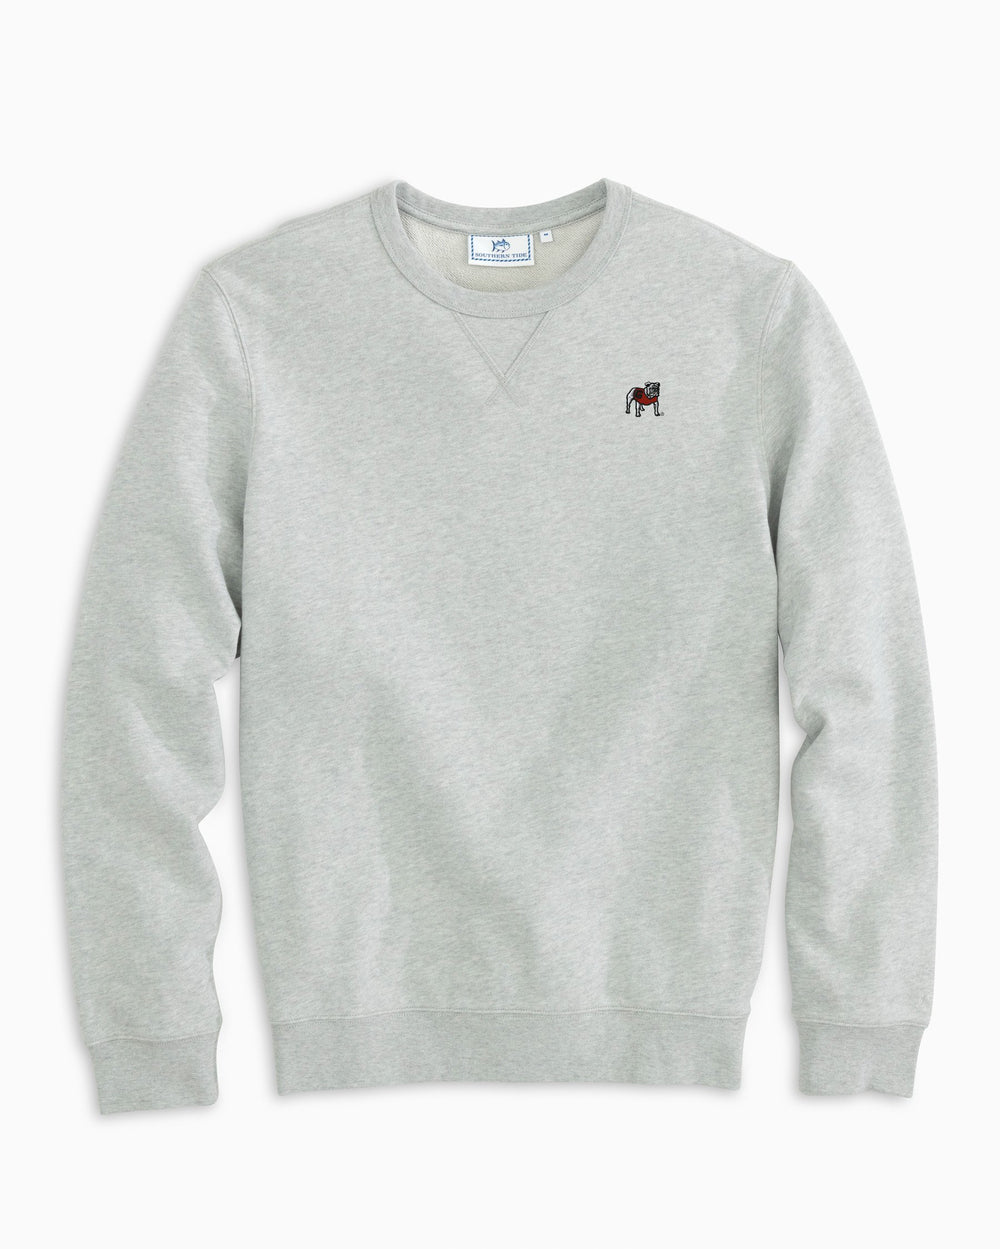 The front view of the Men's Grey Georgia Upper Deck Pullover Sweatshirt by Southern Tide - Heather Slate Grey